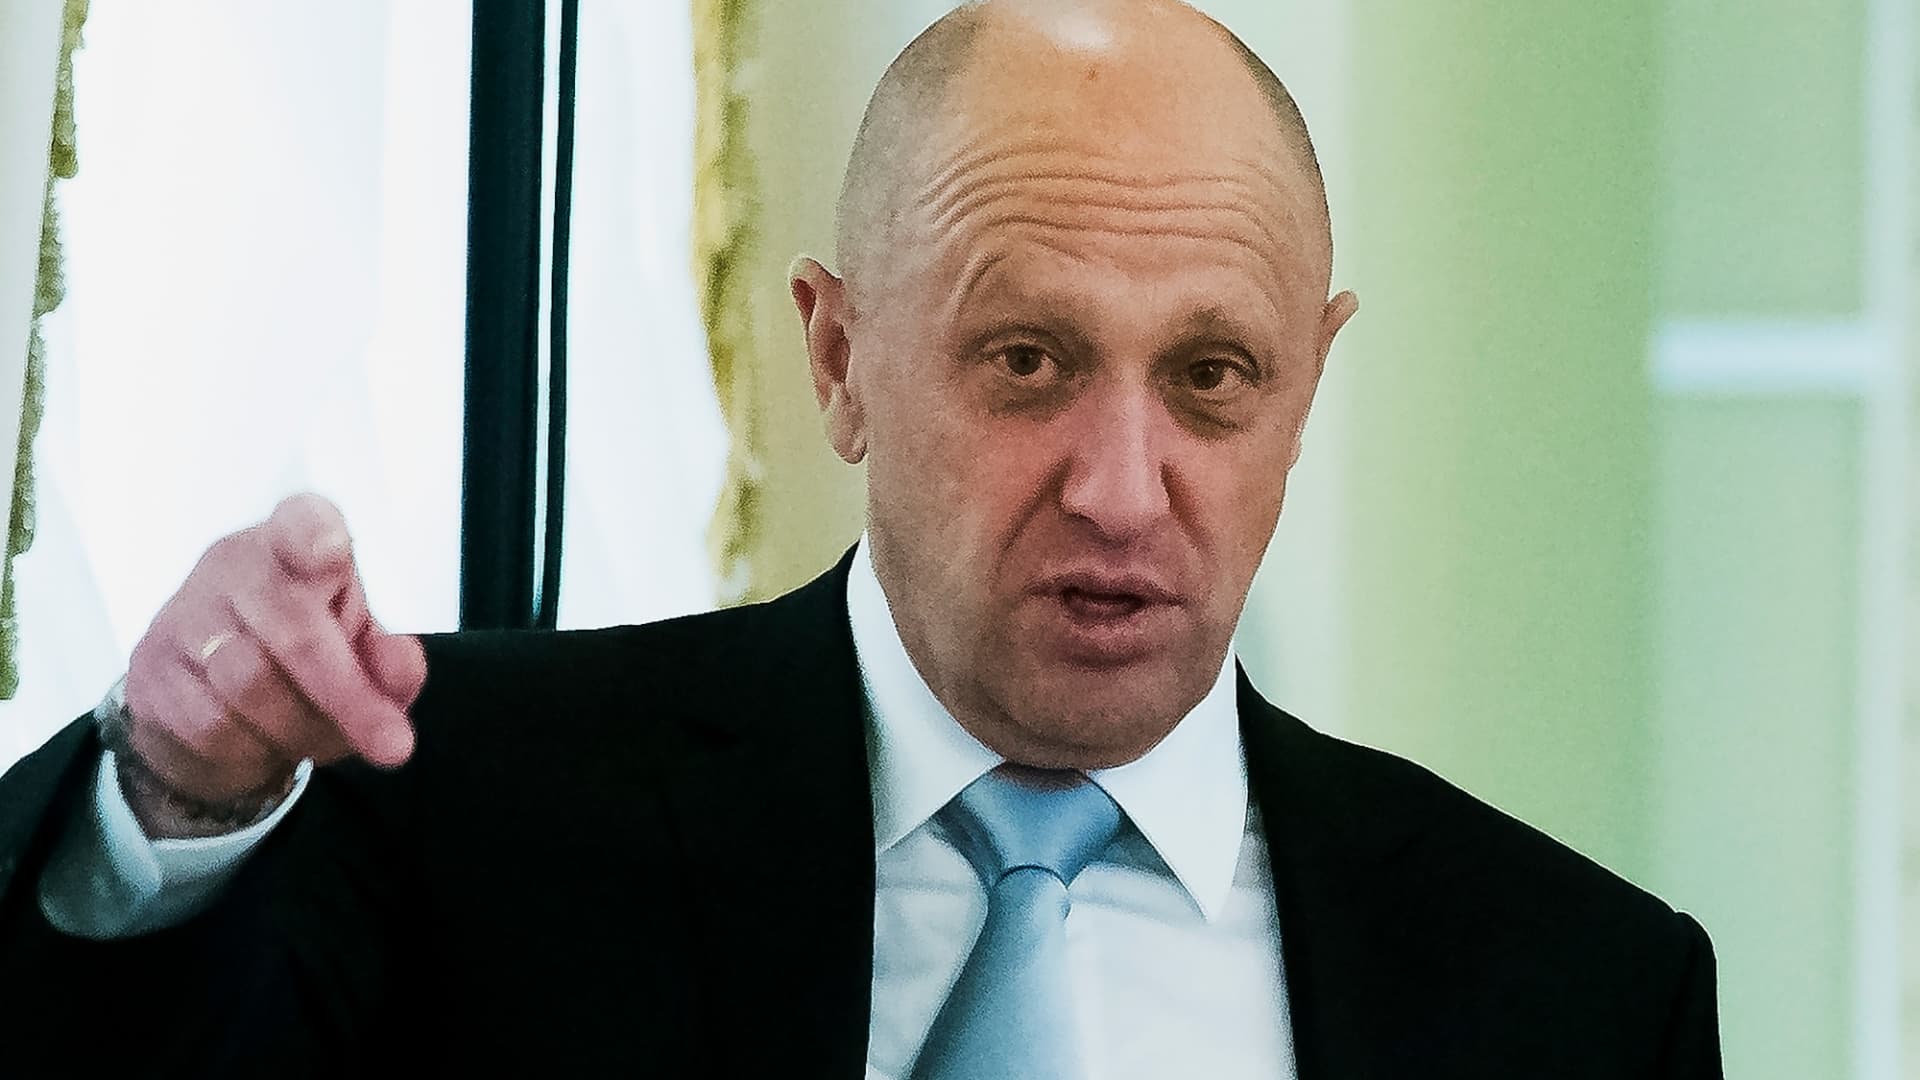 Yevgeny Prigozhin controls Concord Management and Consulting LLC.